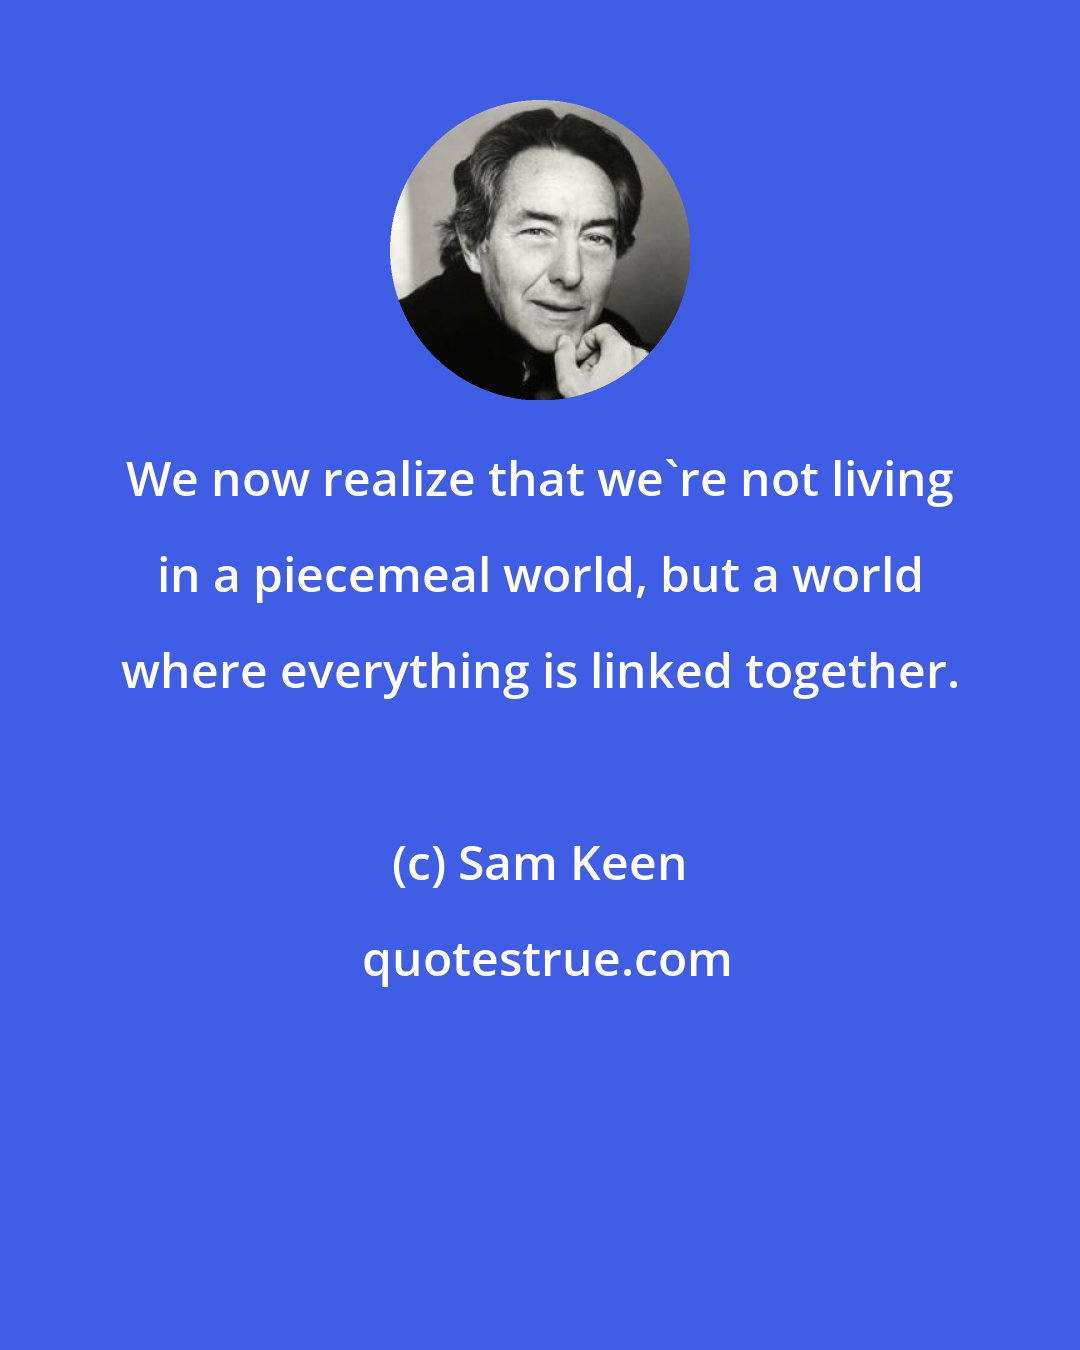 Sam Keen: We now realize that we're not living in a piecemeal world, but a world where everything is linked together.